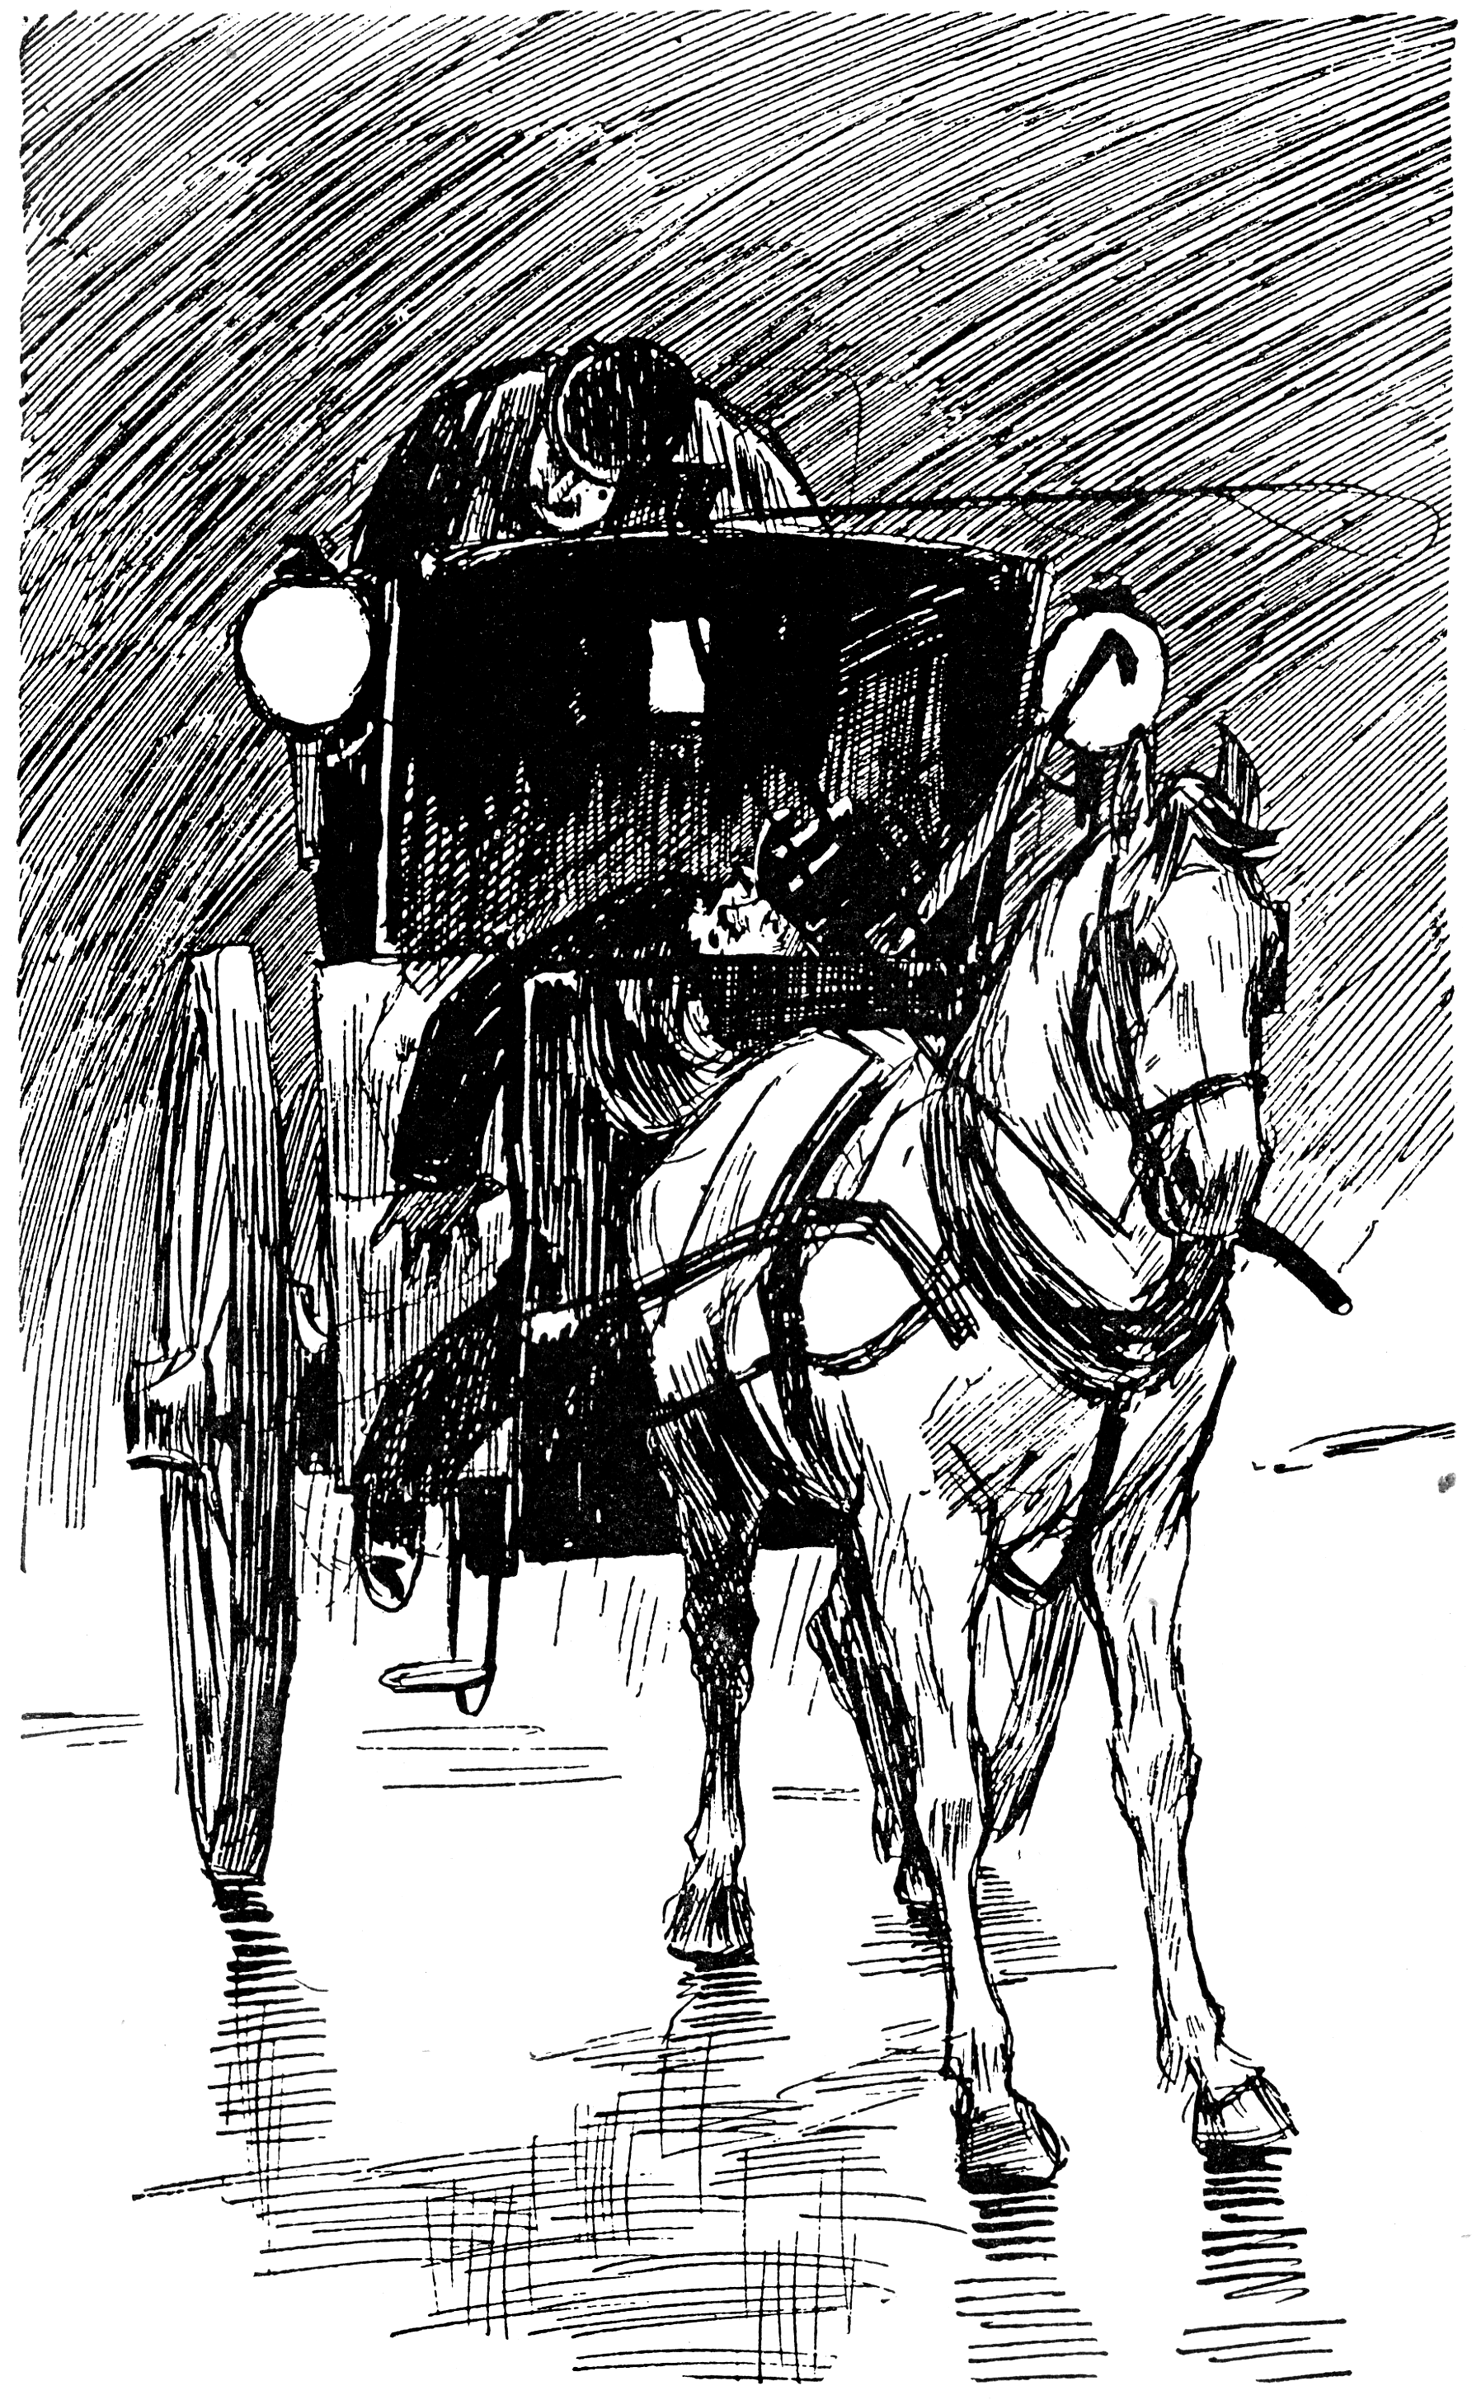  Drawings And Sketches Of Horses With Corral Buggies for Kids